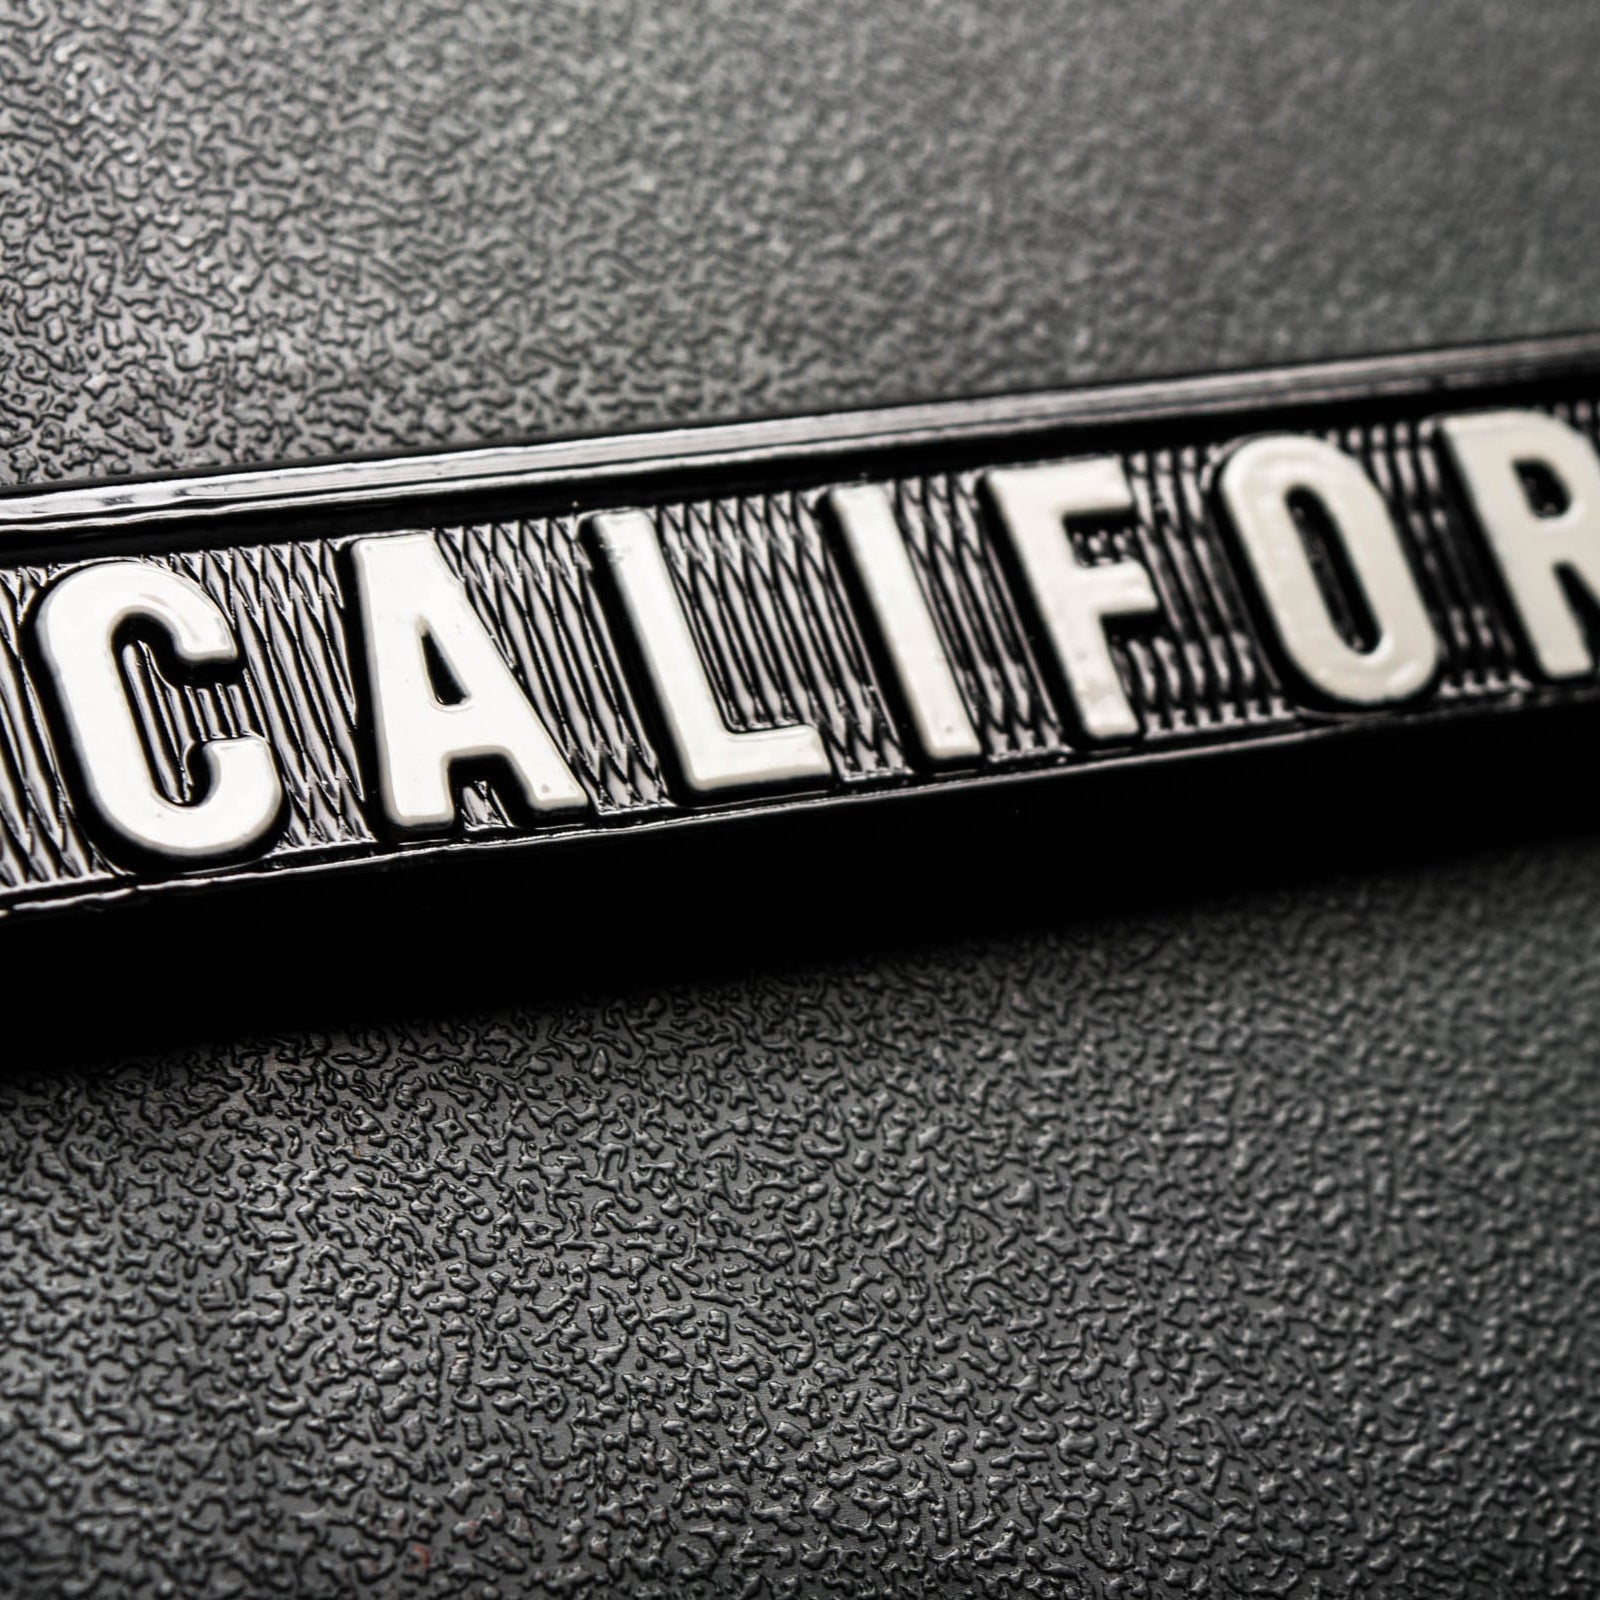 Close-up of California wordmark on a black rim of a silver license plate holder.